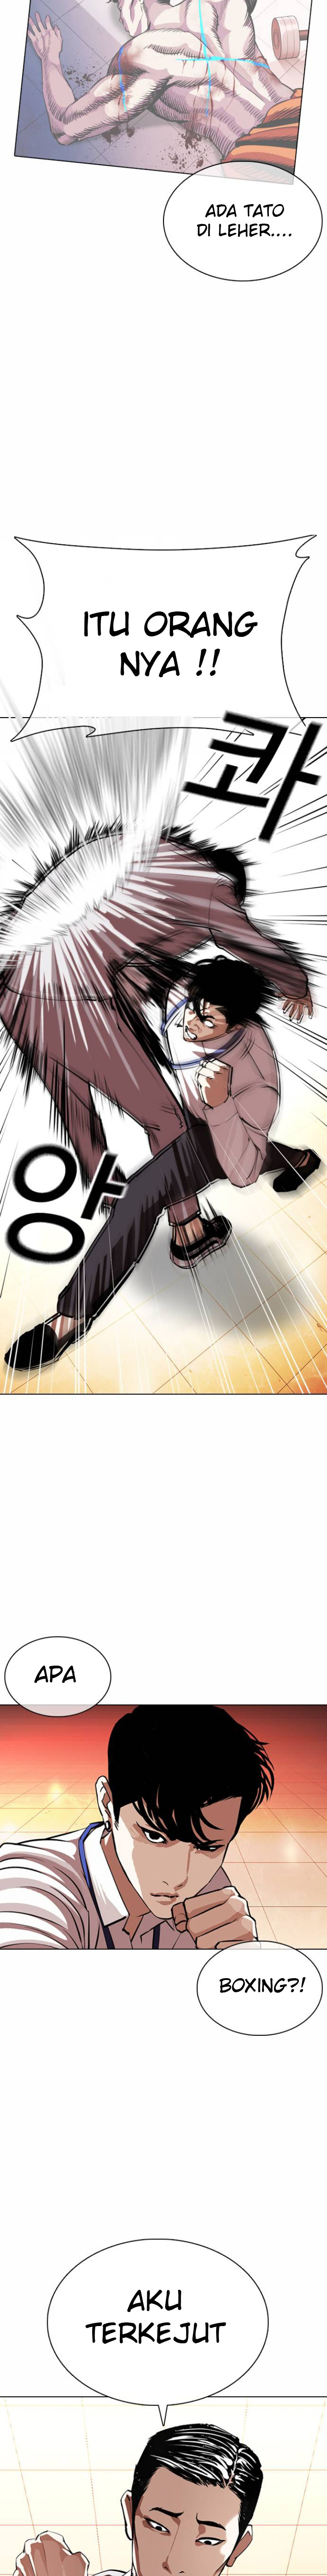 Lookism Chapter 361 Image 14